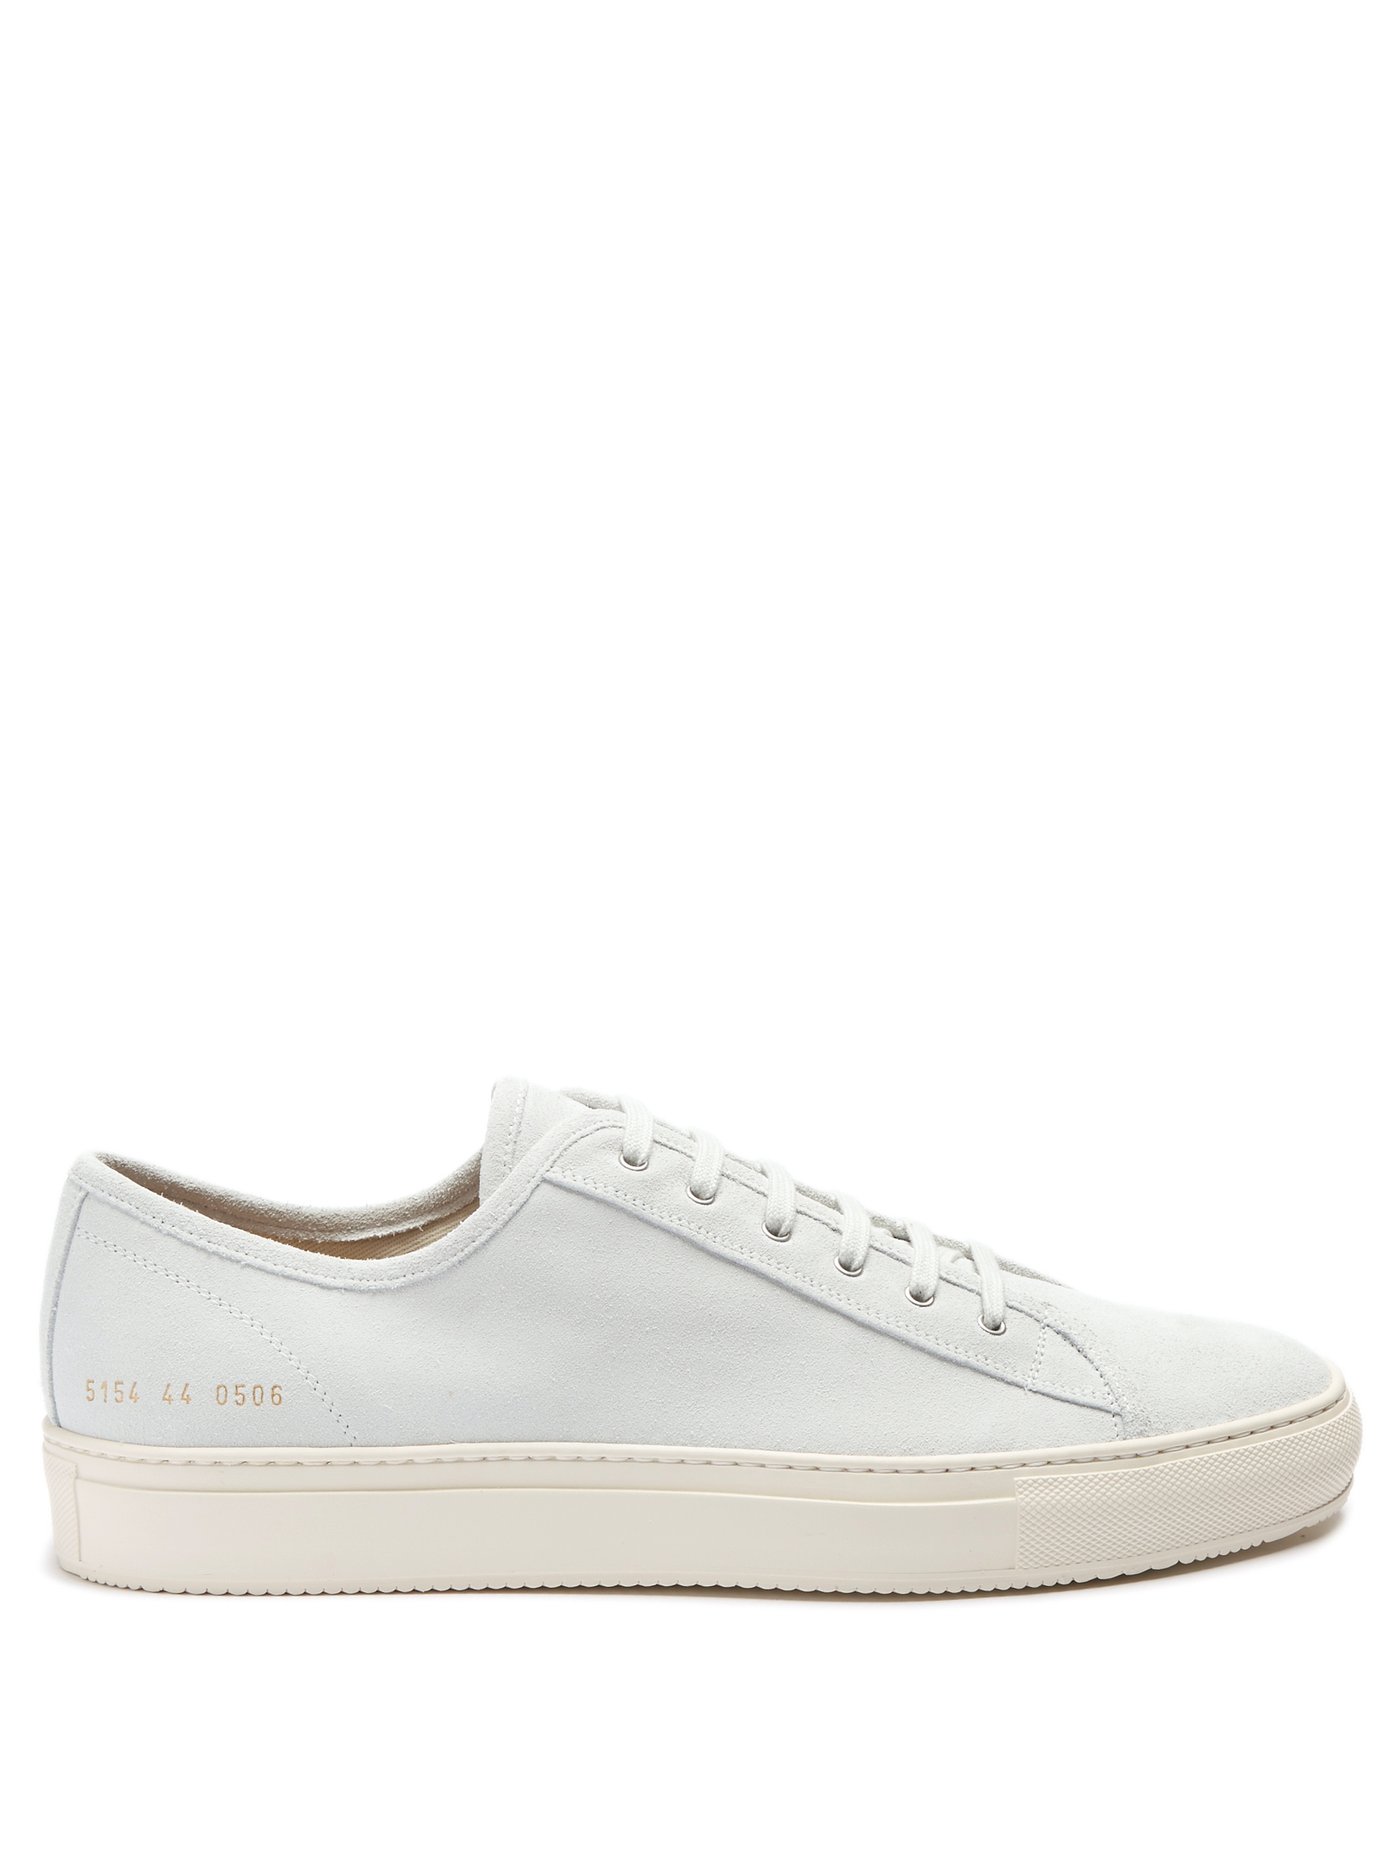 common projects tournament low